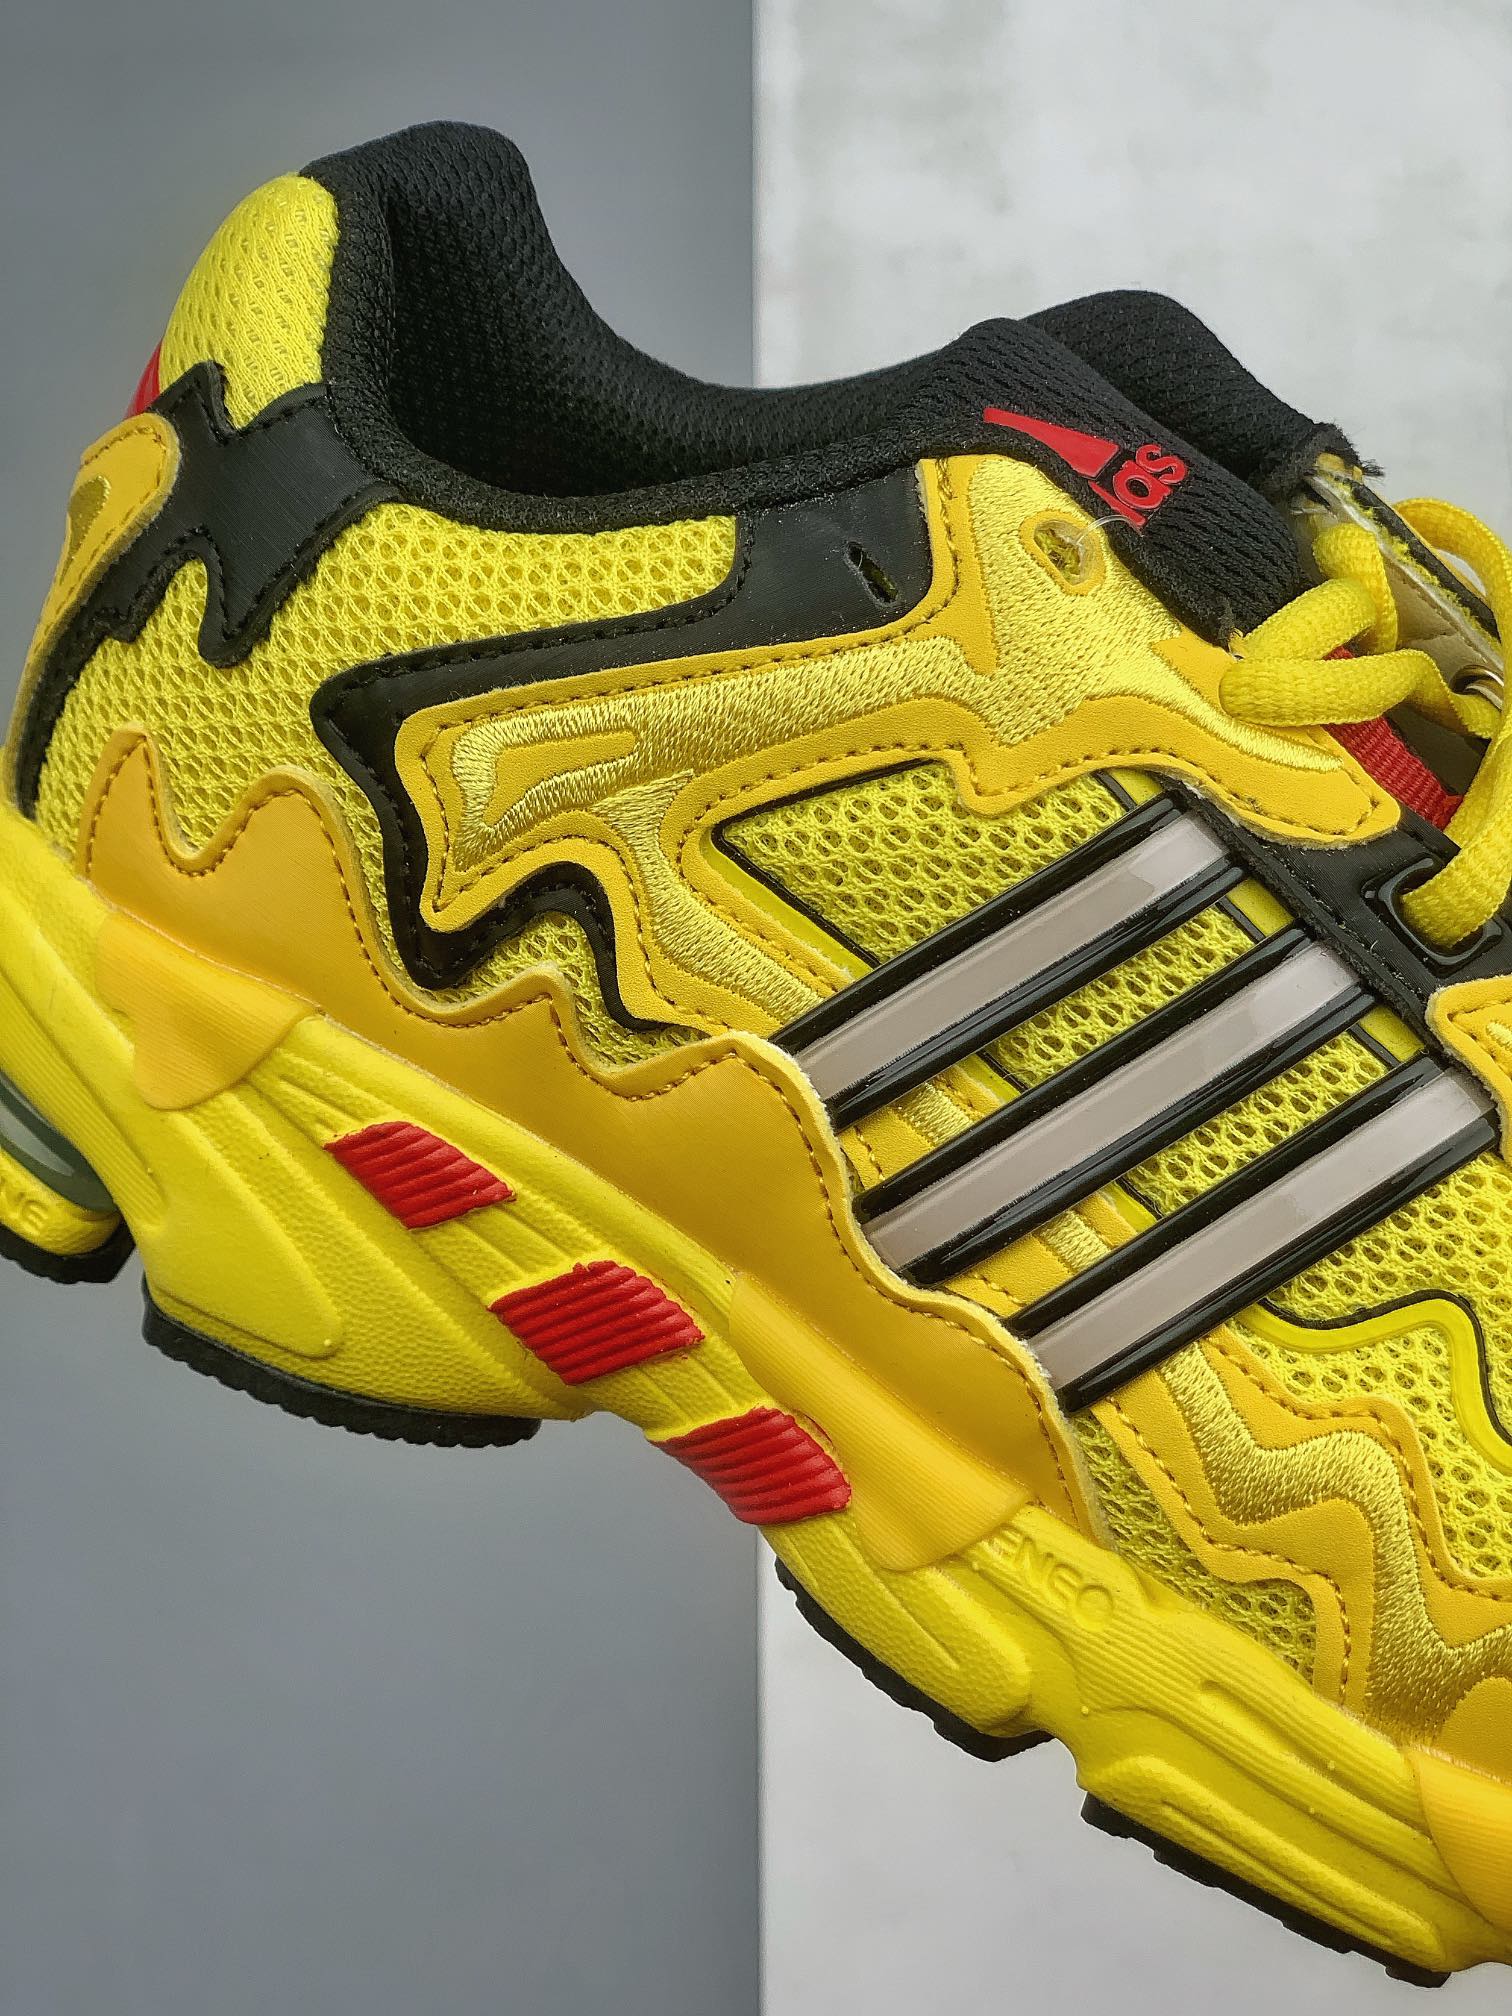 Adidas Bad Bunny x Response CL Yellow GY0101 - Limited Edition Collaboration